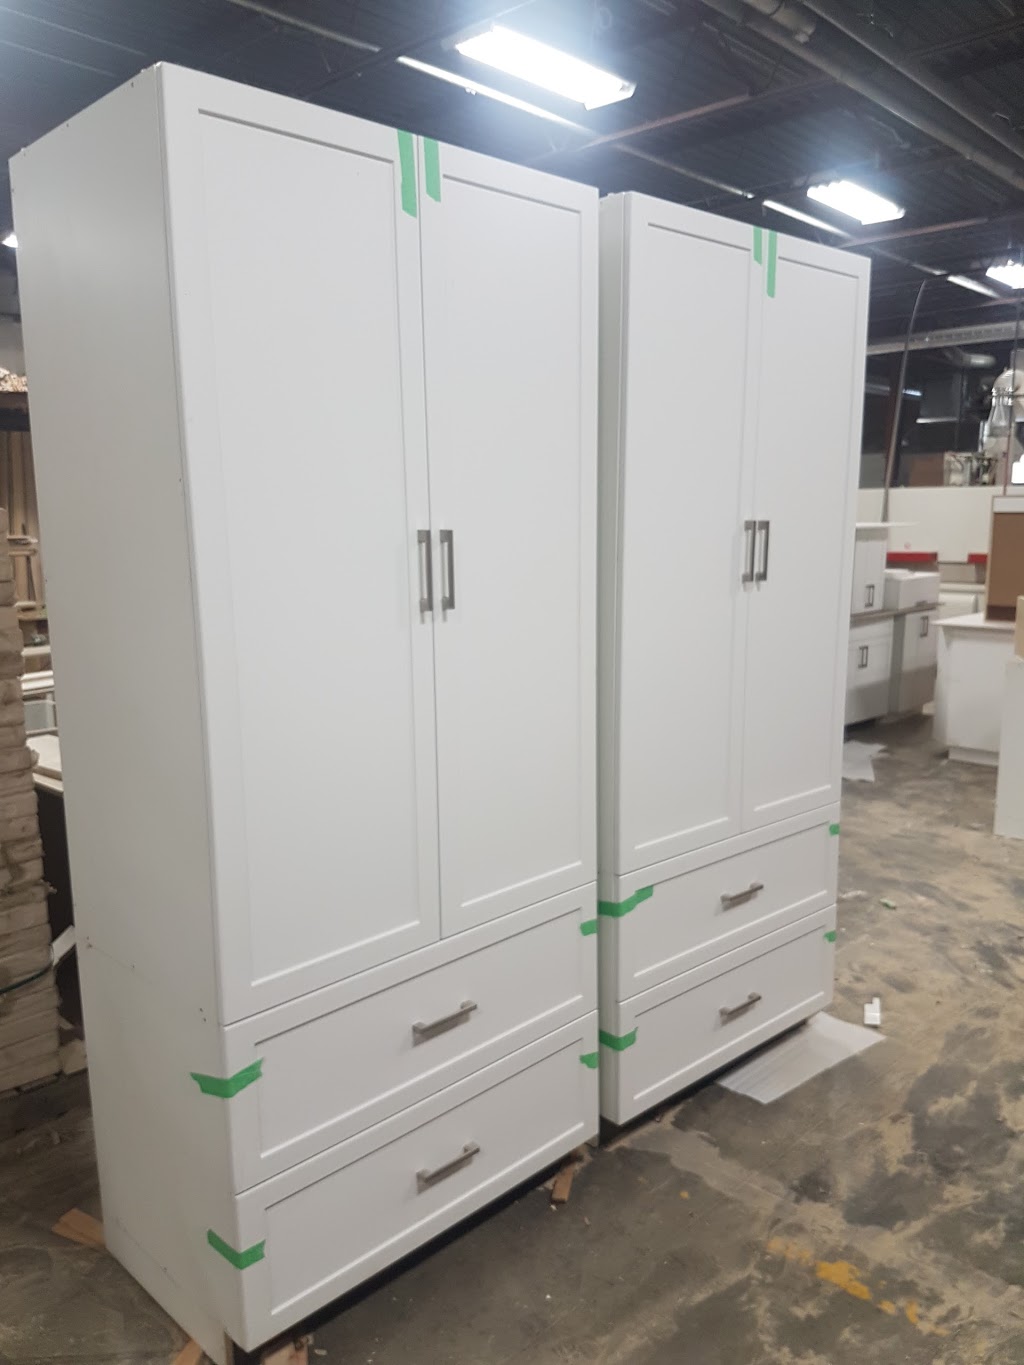 Arto Kitchen Cabinet and Millwork | furniture store | 599 Denison St, Markham, ON L3R 1B8, Canada | 4168005788 OR +1 416-800-5788